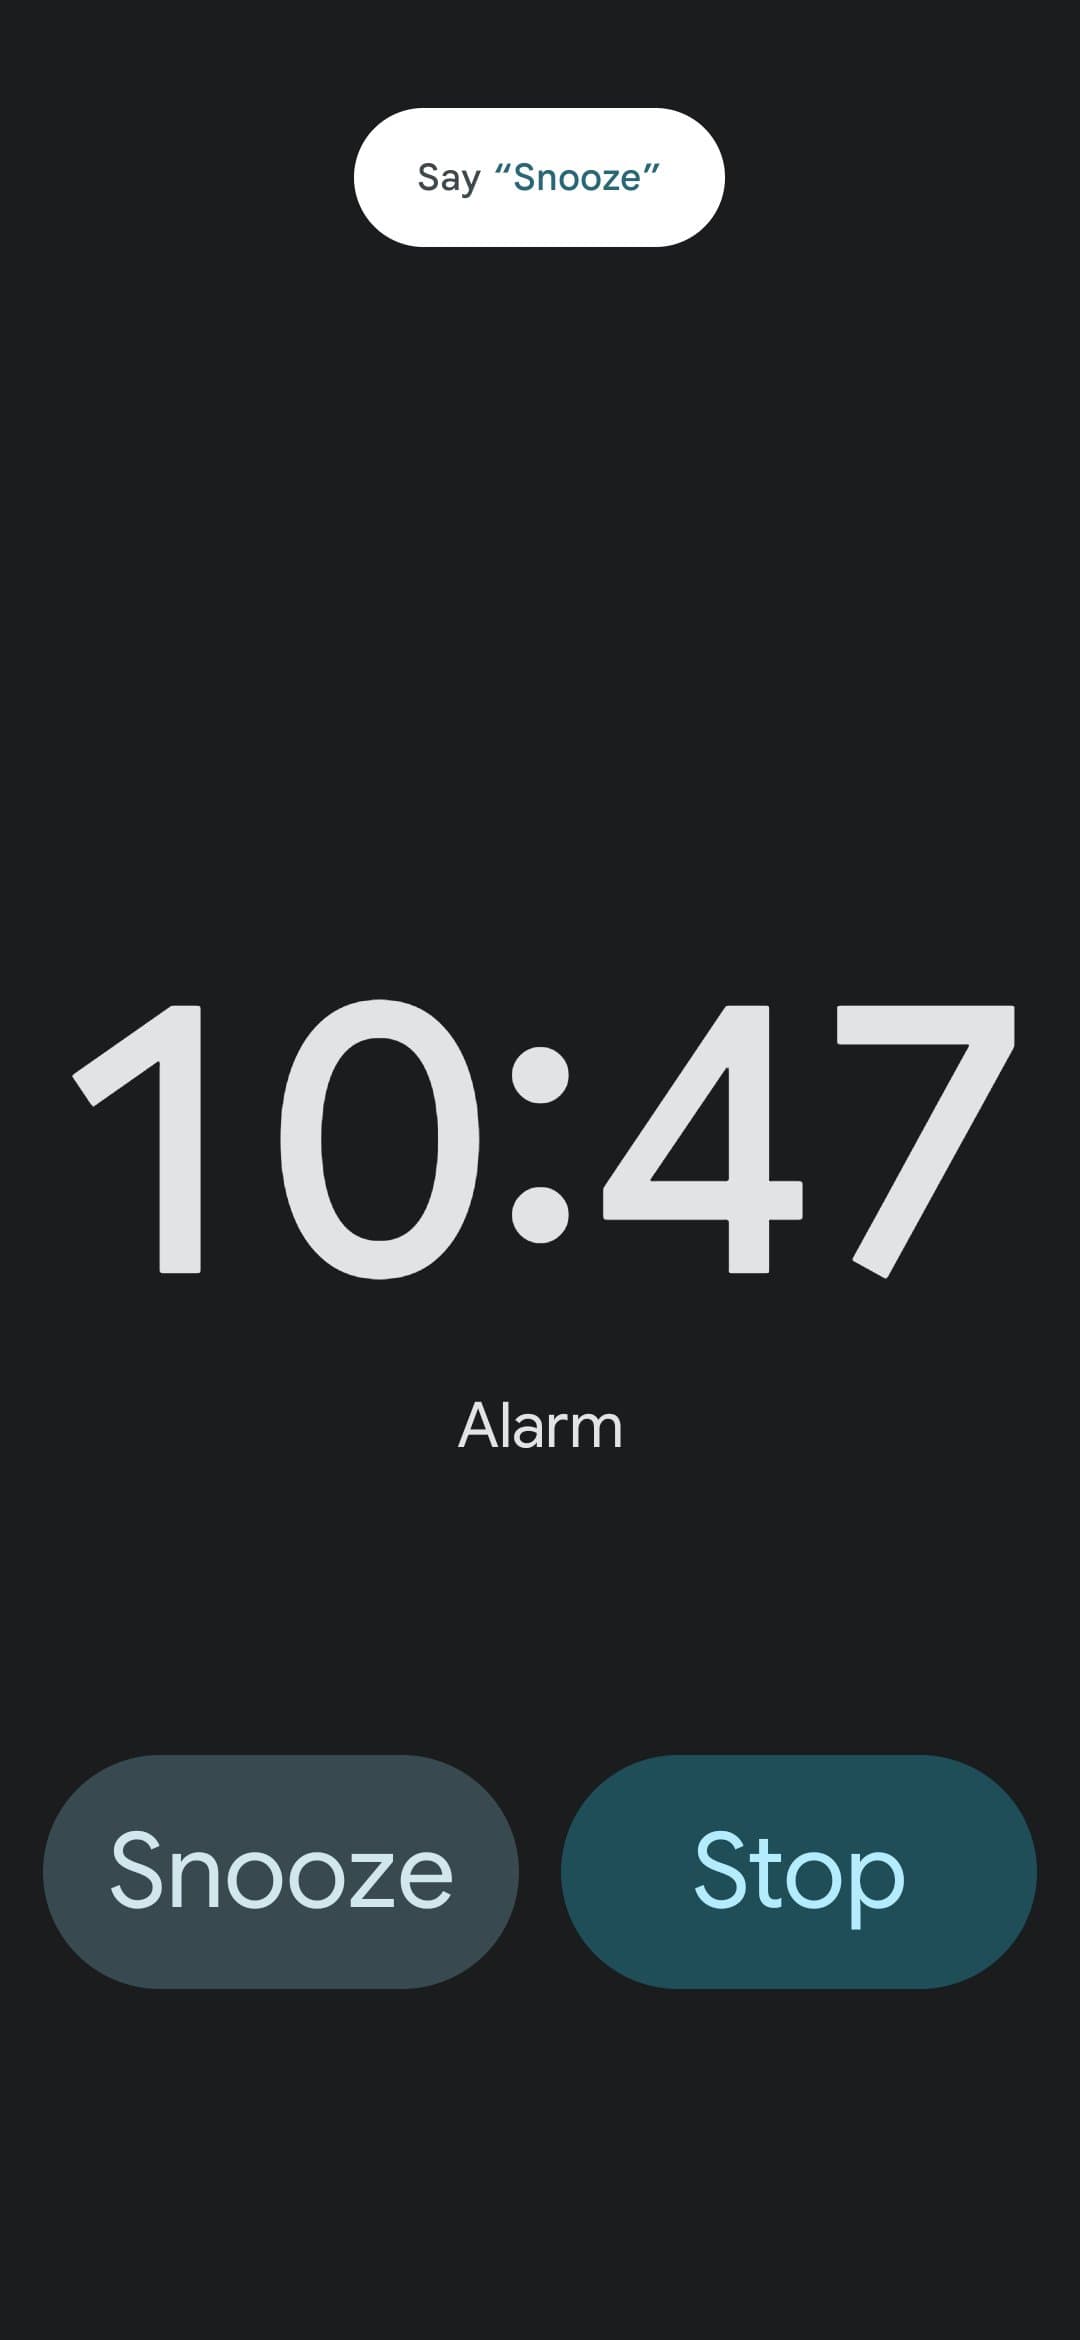 Google Clock 7.4 updates timer UI and tests buttons for ending alarms